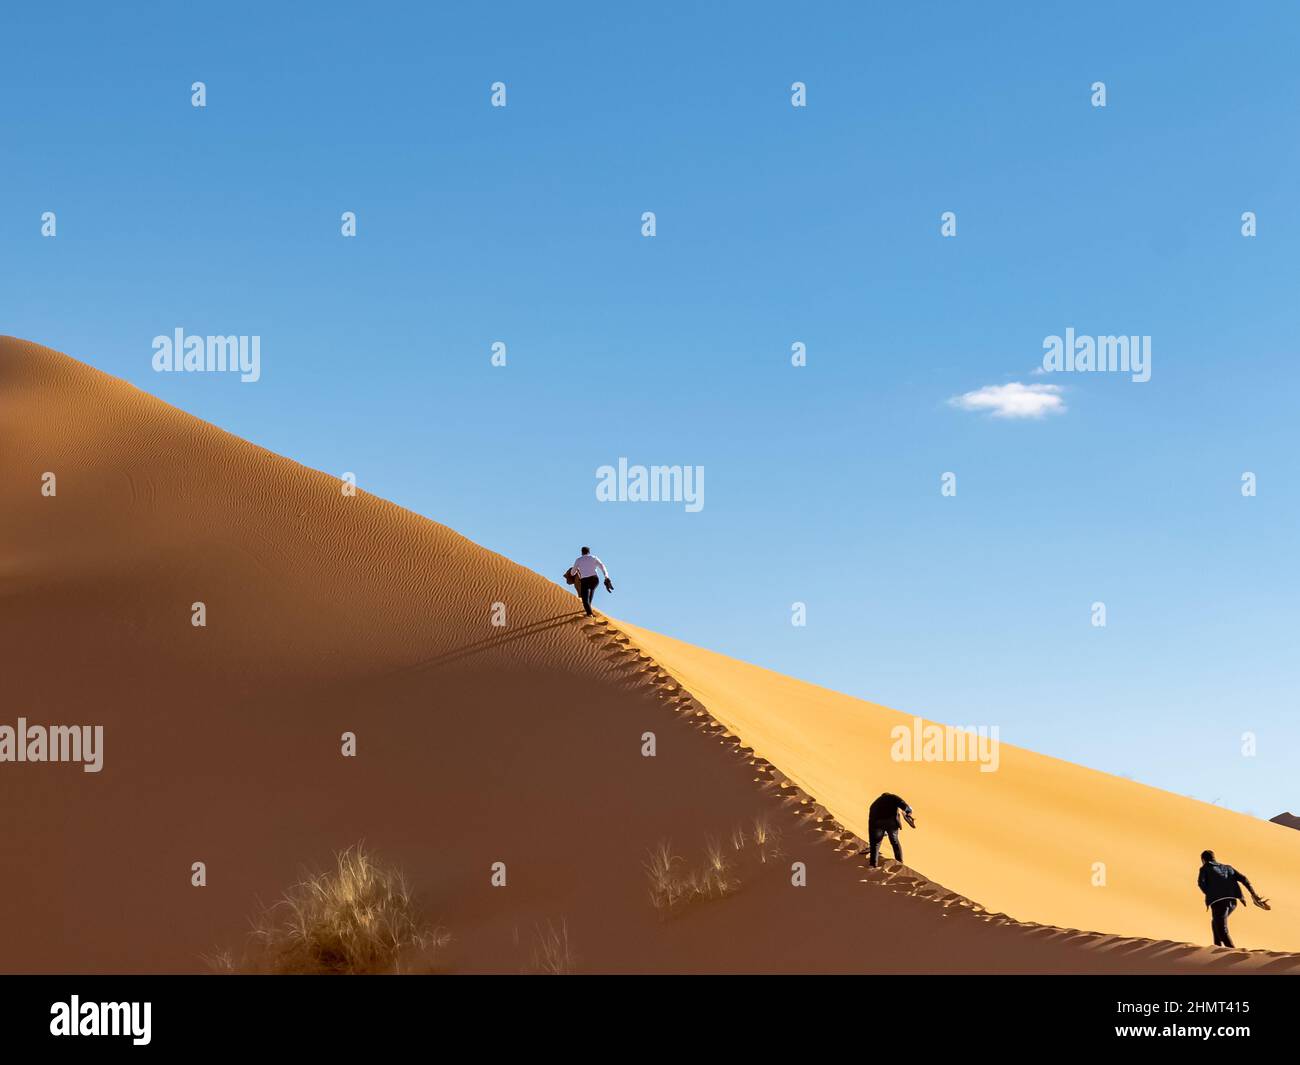 Unrecognizable tourists climbing with difficulty along the crest of a high sand dune, making efforts, holding their shoes. Low angle view from behind. Stock Photo